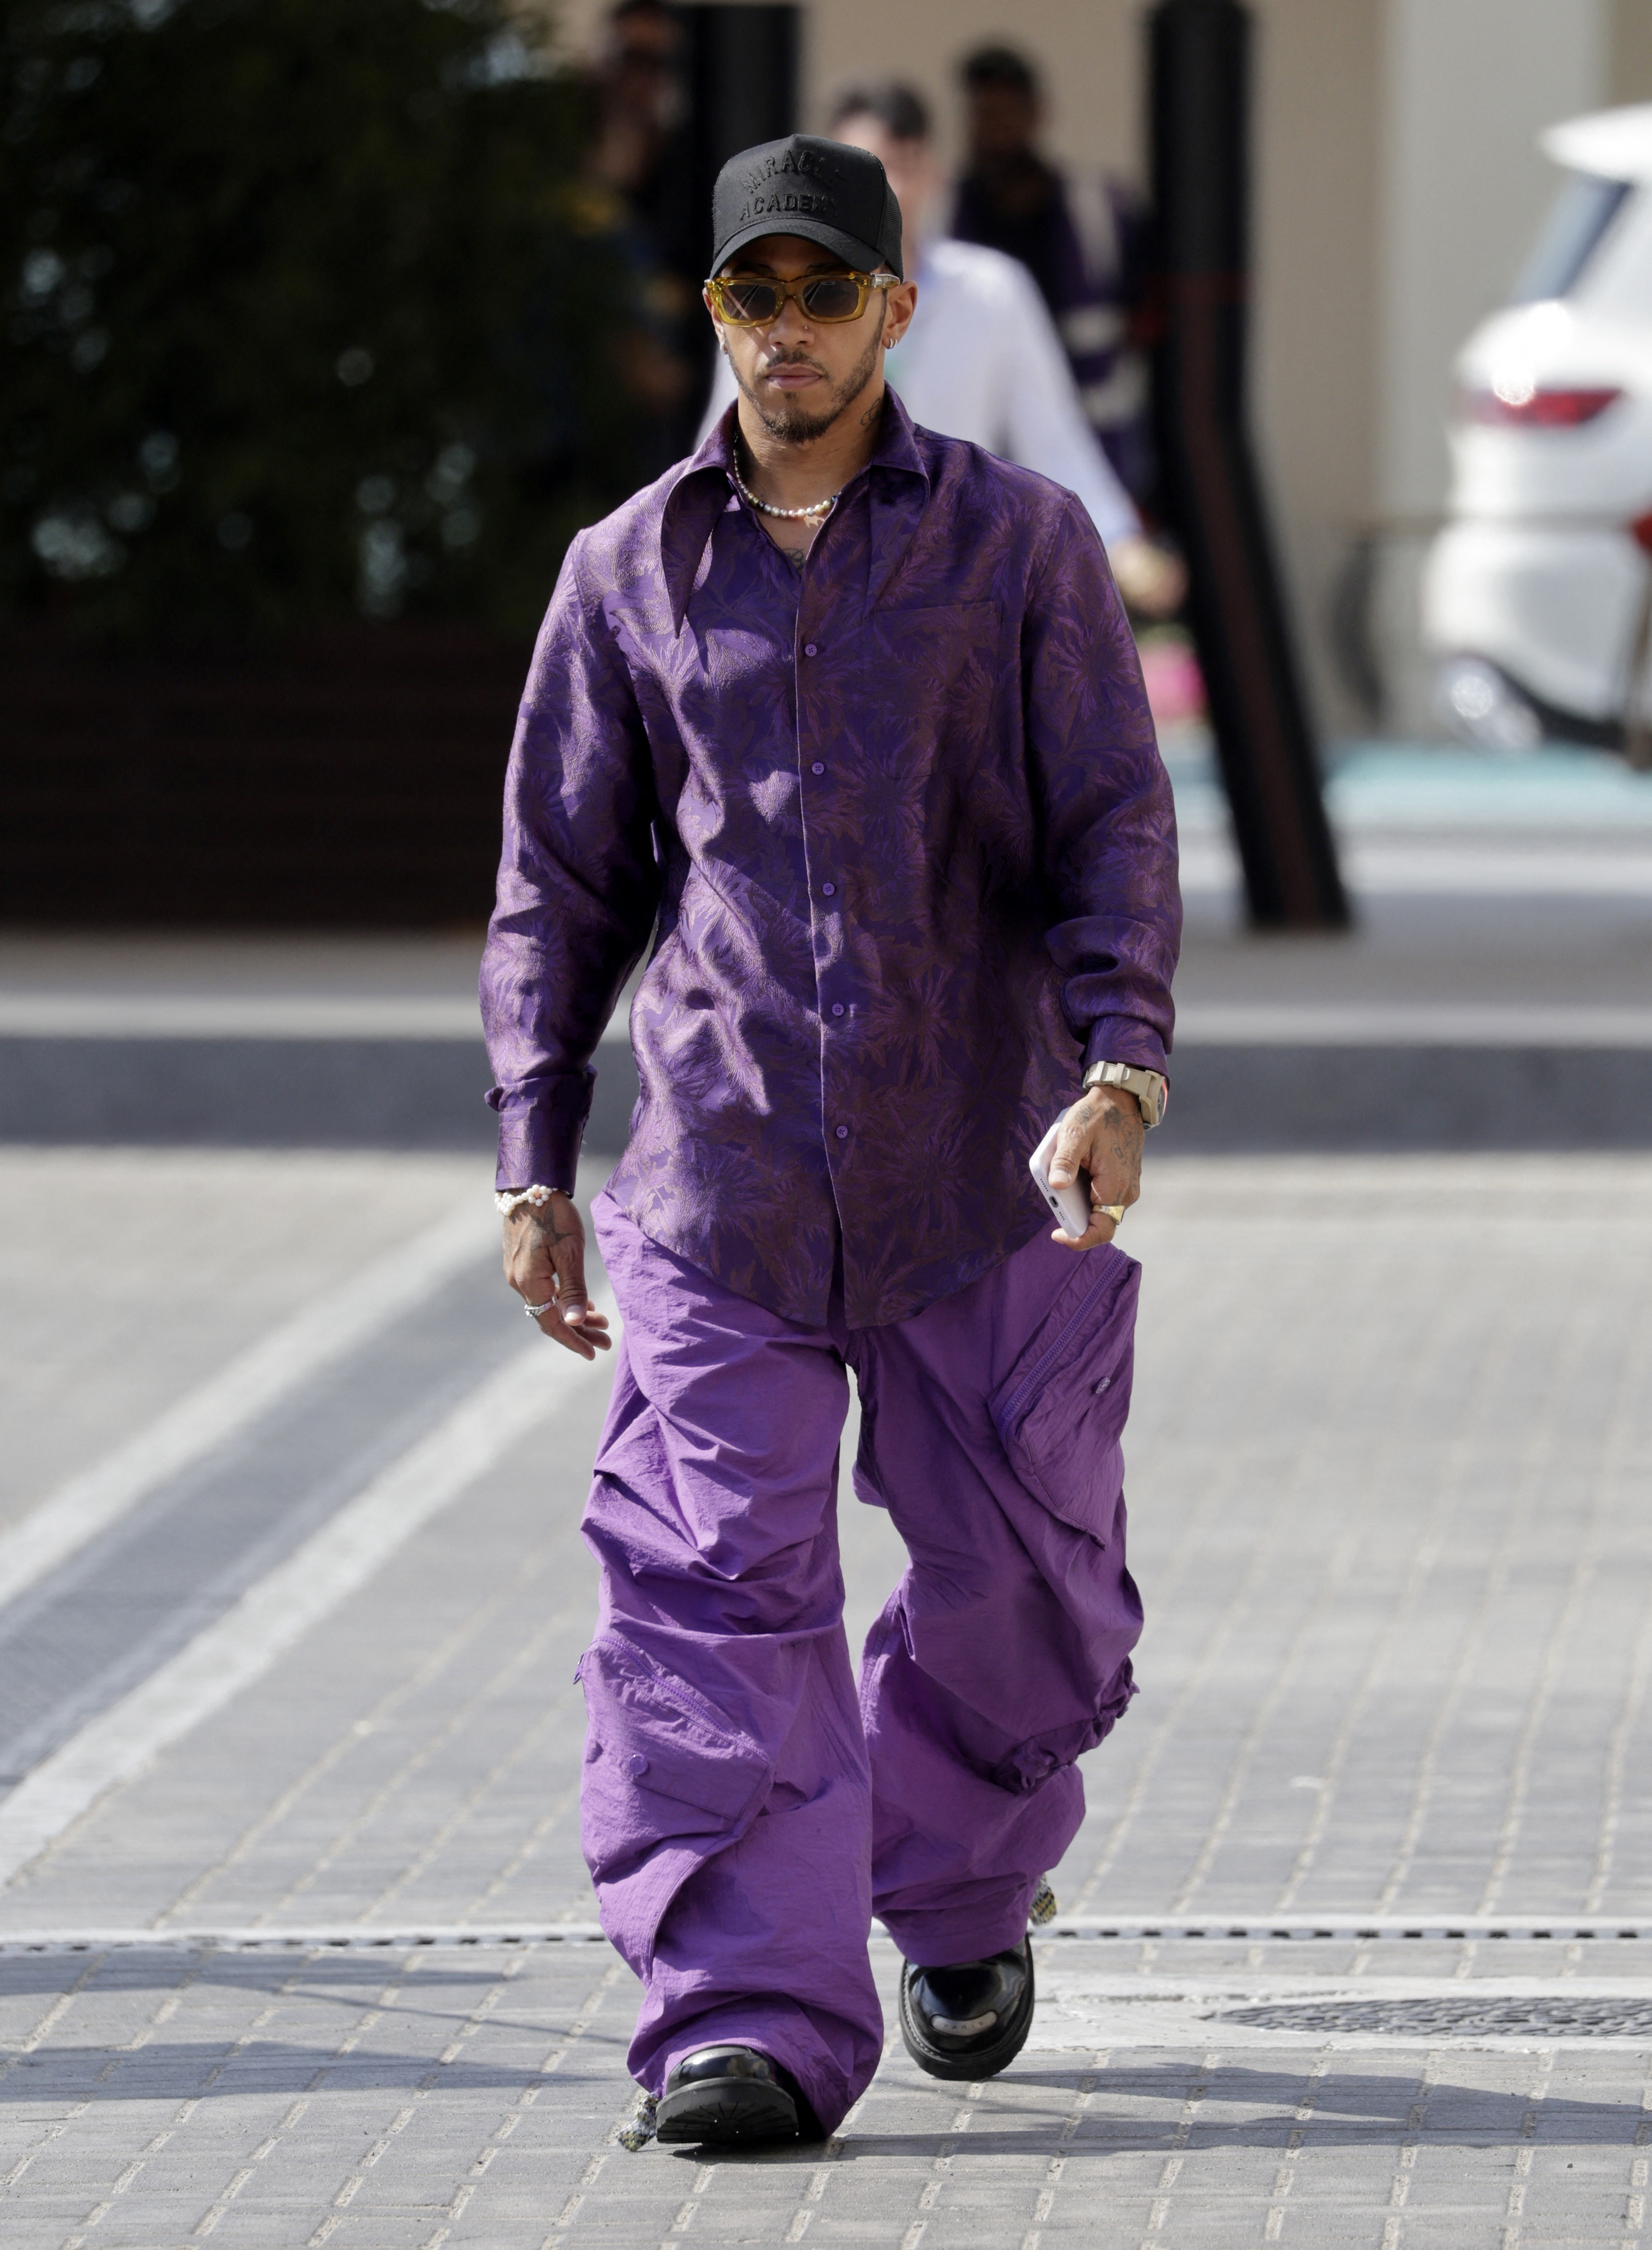 , Lewis Hamilton returns to Abu Dhabi a year on from Max Verstappen F1 title chaos in incredible all-purple ensemble